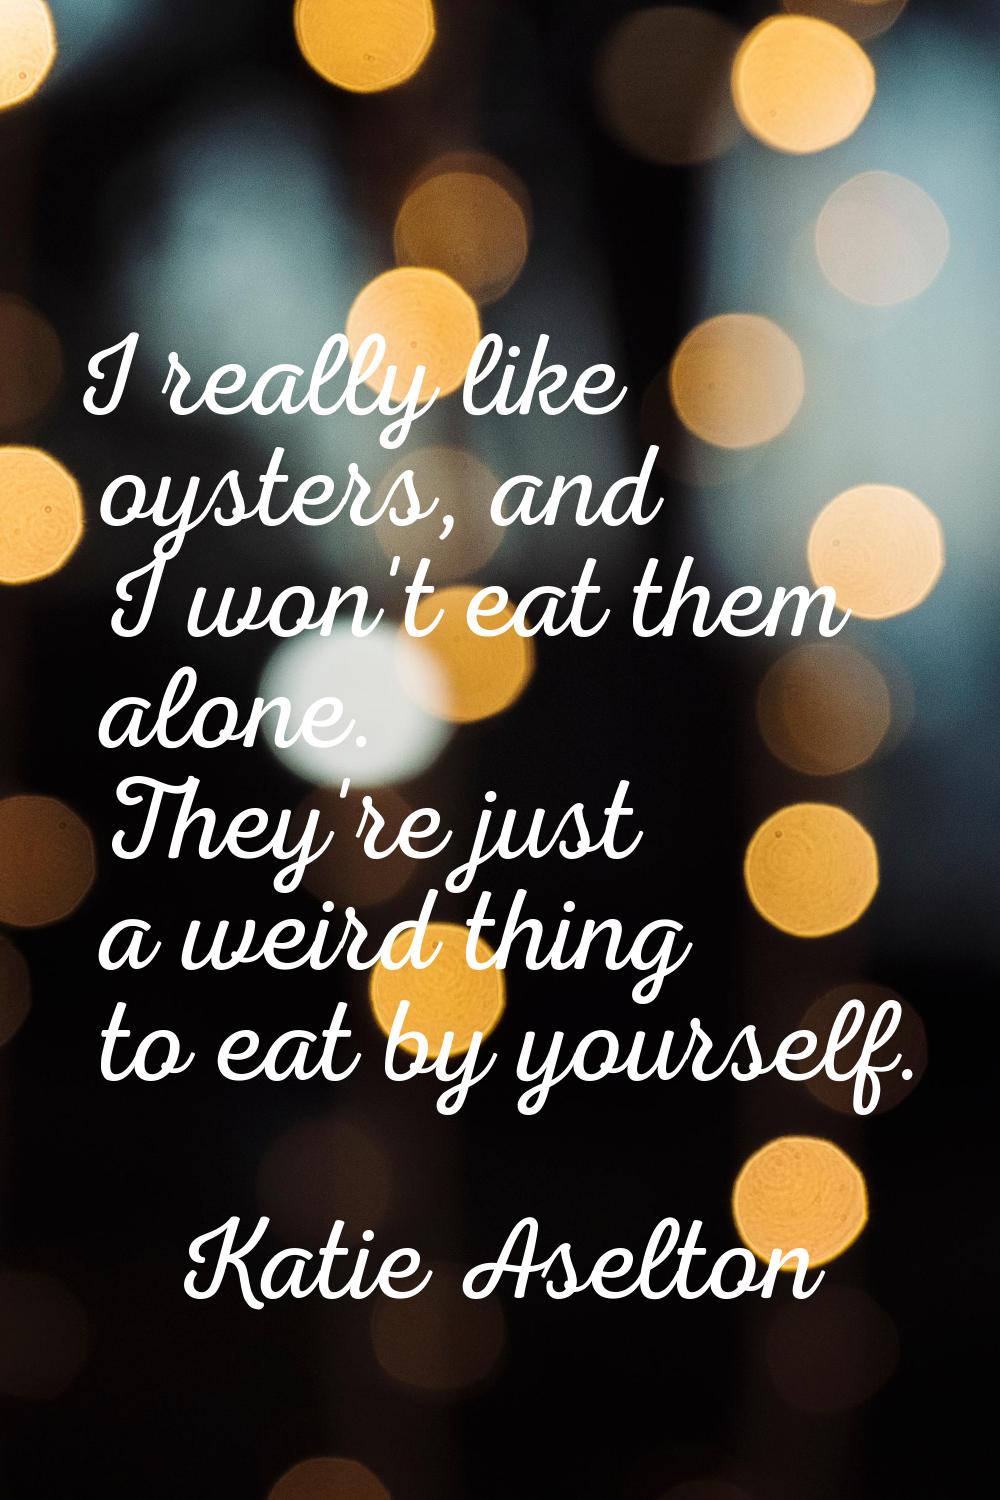 I really like oysters, and I won't eat them alone. They're just a weird thing to eat by yourself.